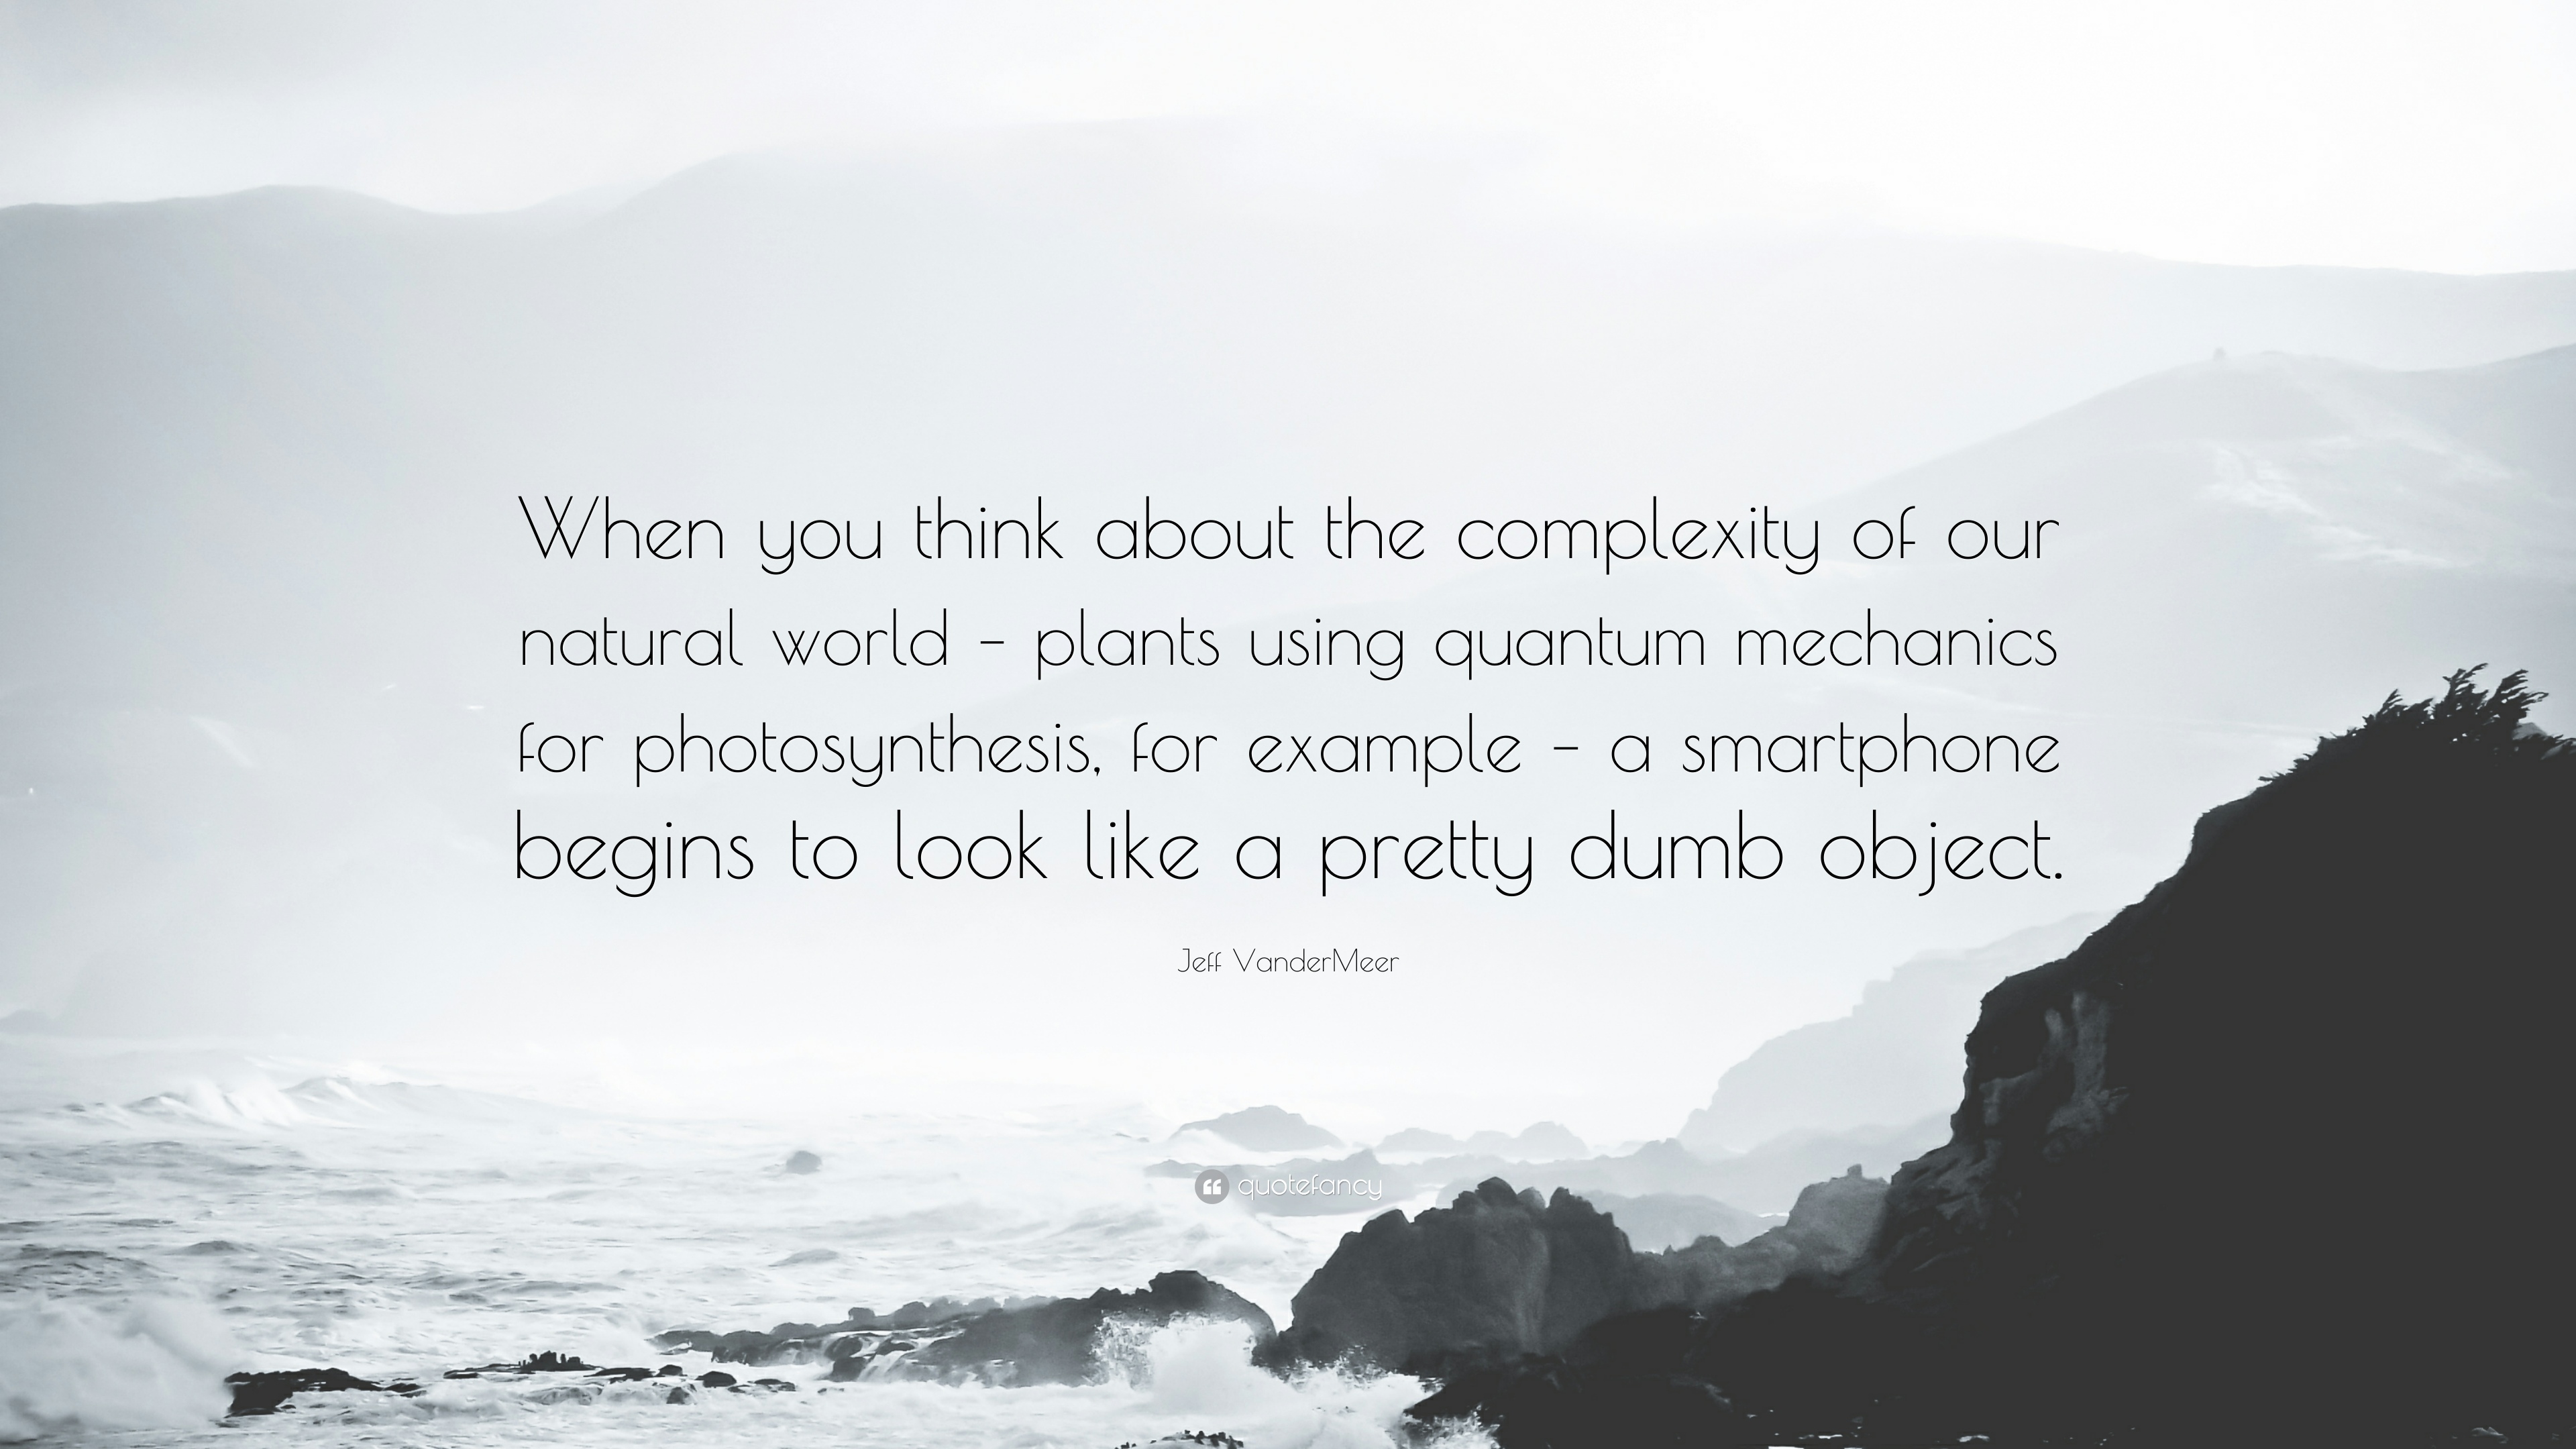 Jeff VanderMeer Quote: “When you think about the complexity of our